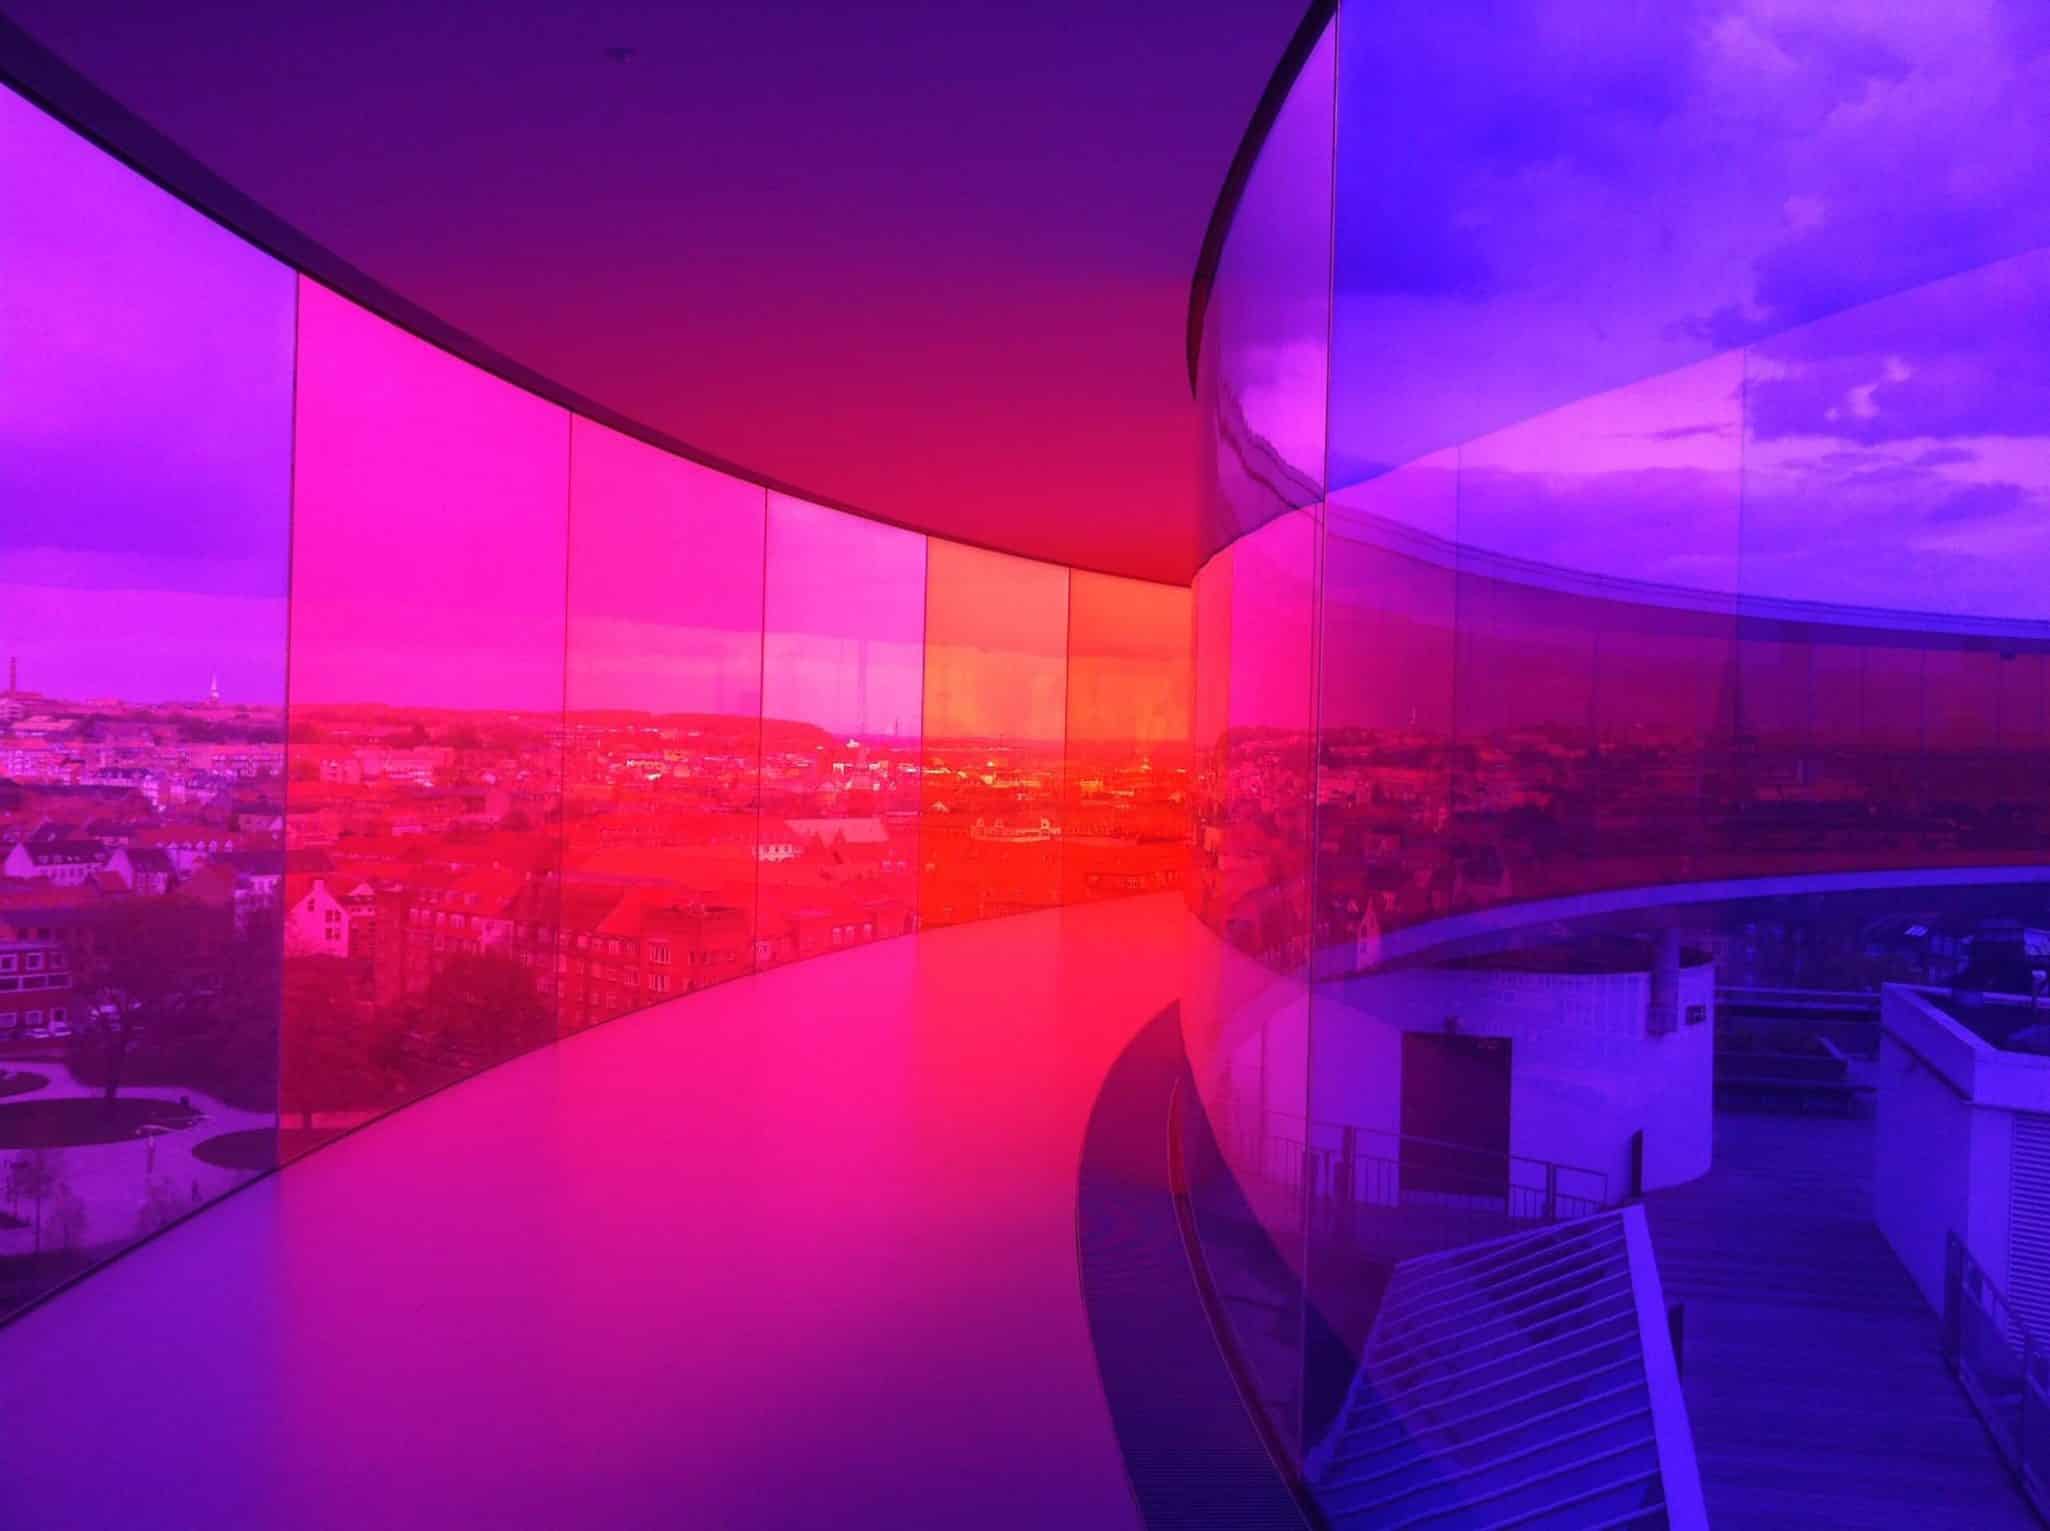 "Your Rainbow Panorama" at the top of ARoS